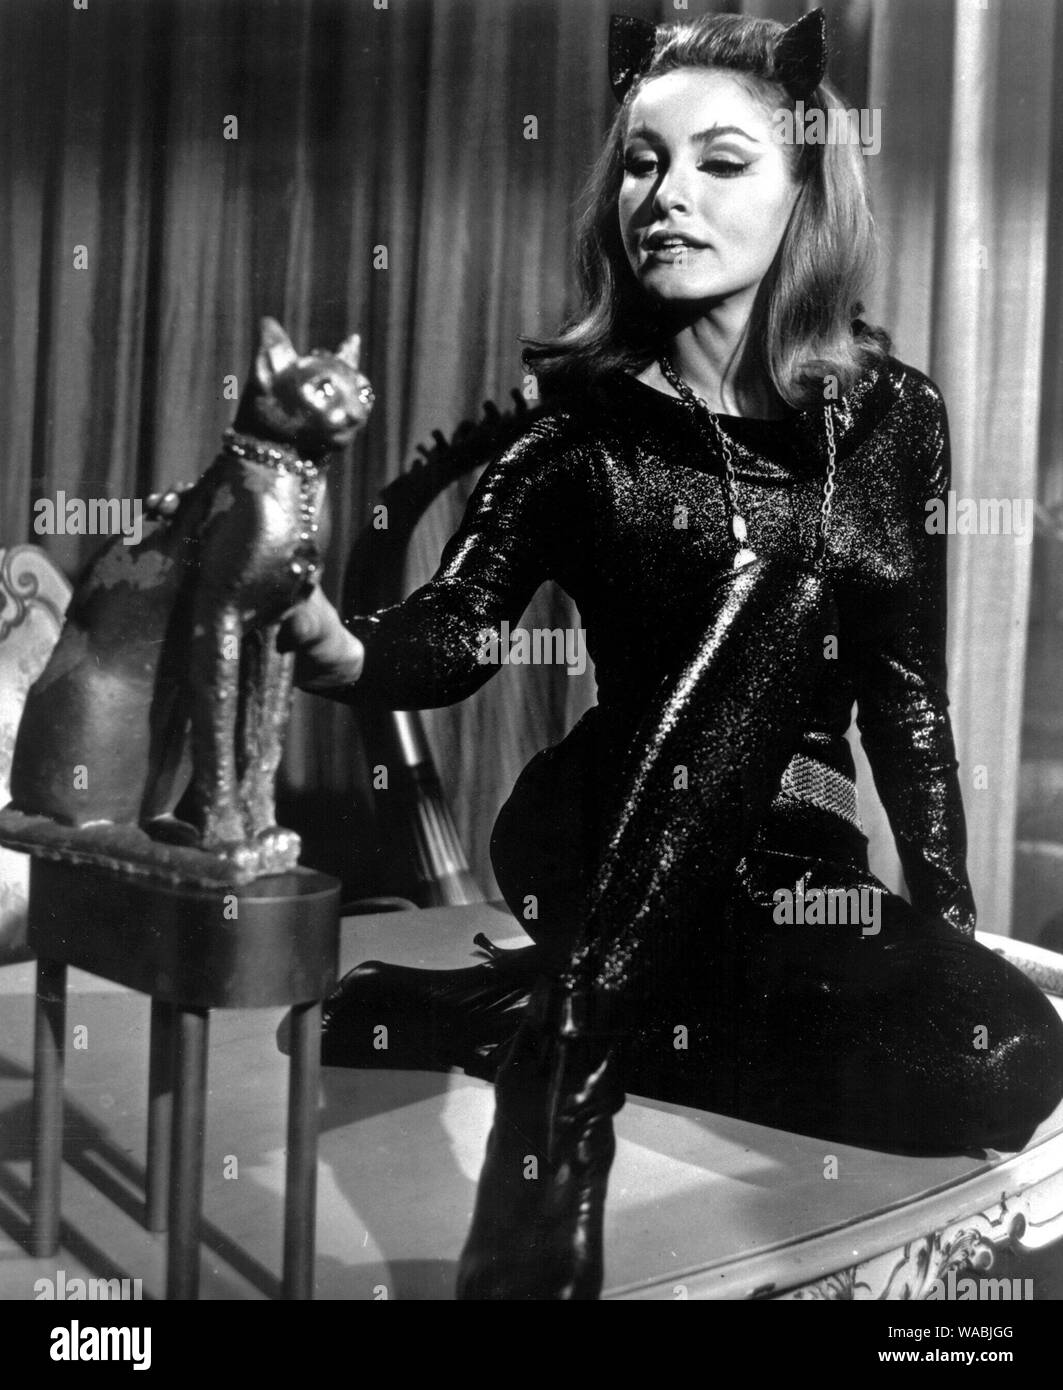 Julie Newmar, in character as The Catwoman in a publicity photo for 